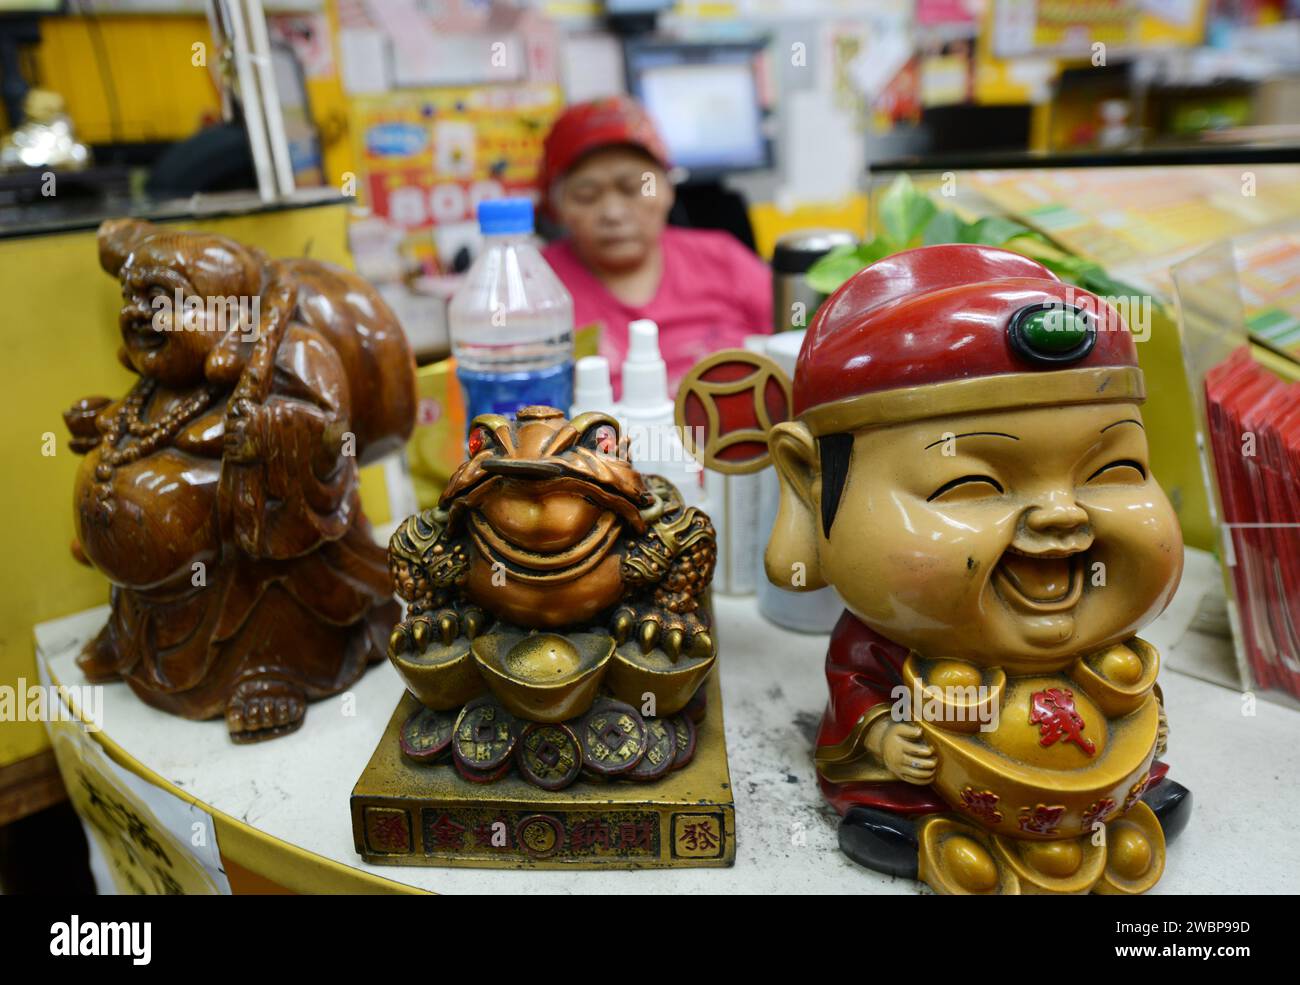 Lucky charm figures at a shop on Xinyi Rd in Taipei, Taiwan. Stock Photo